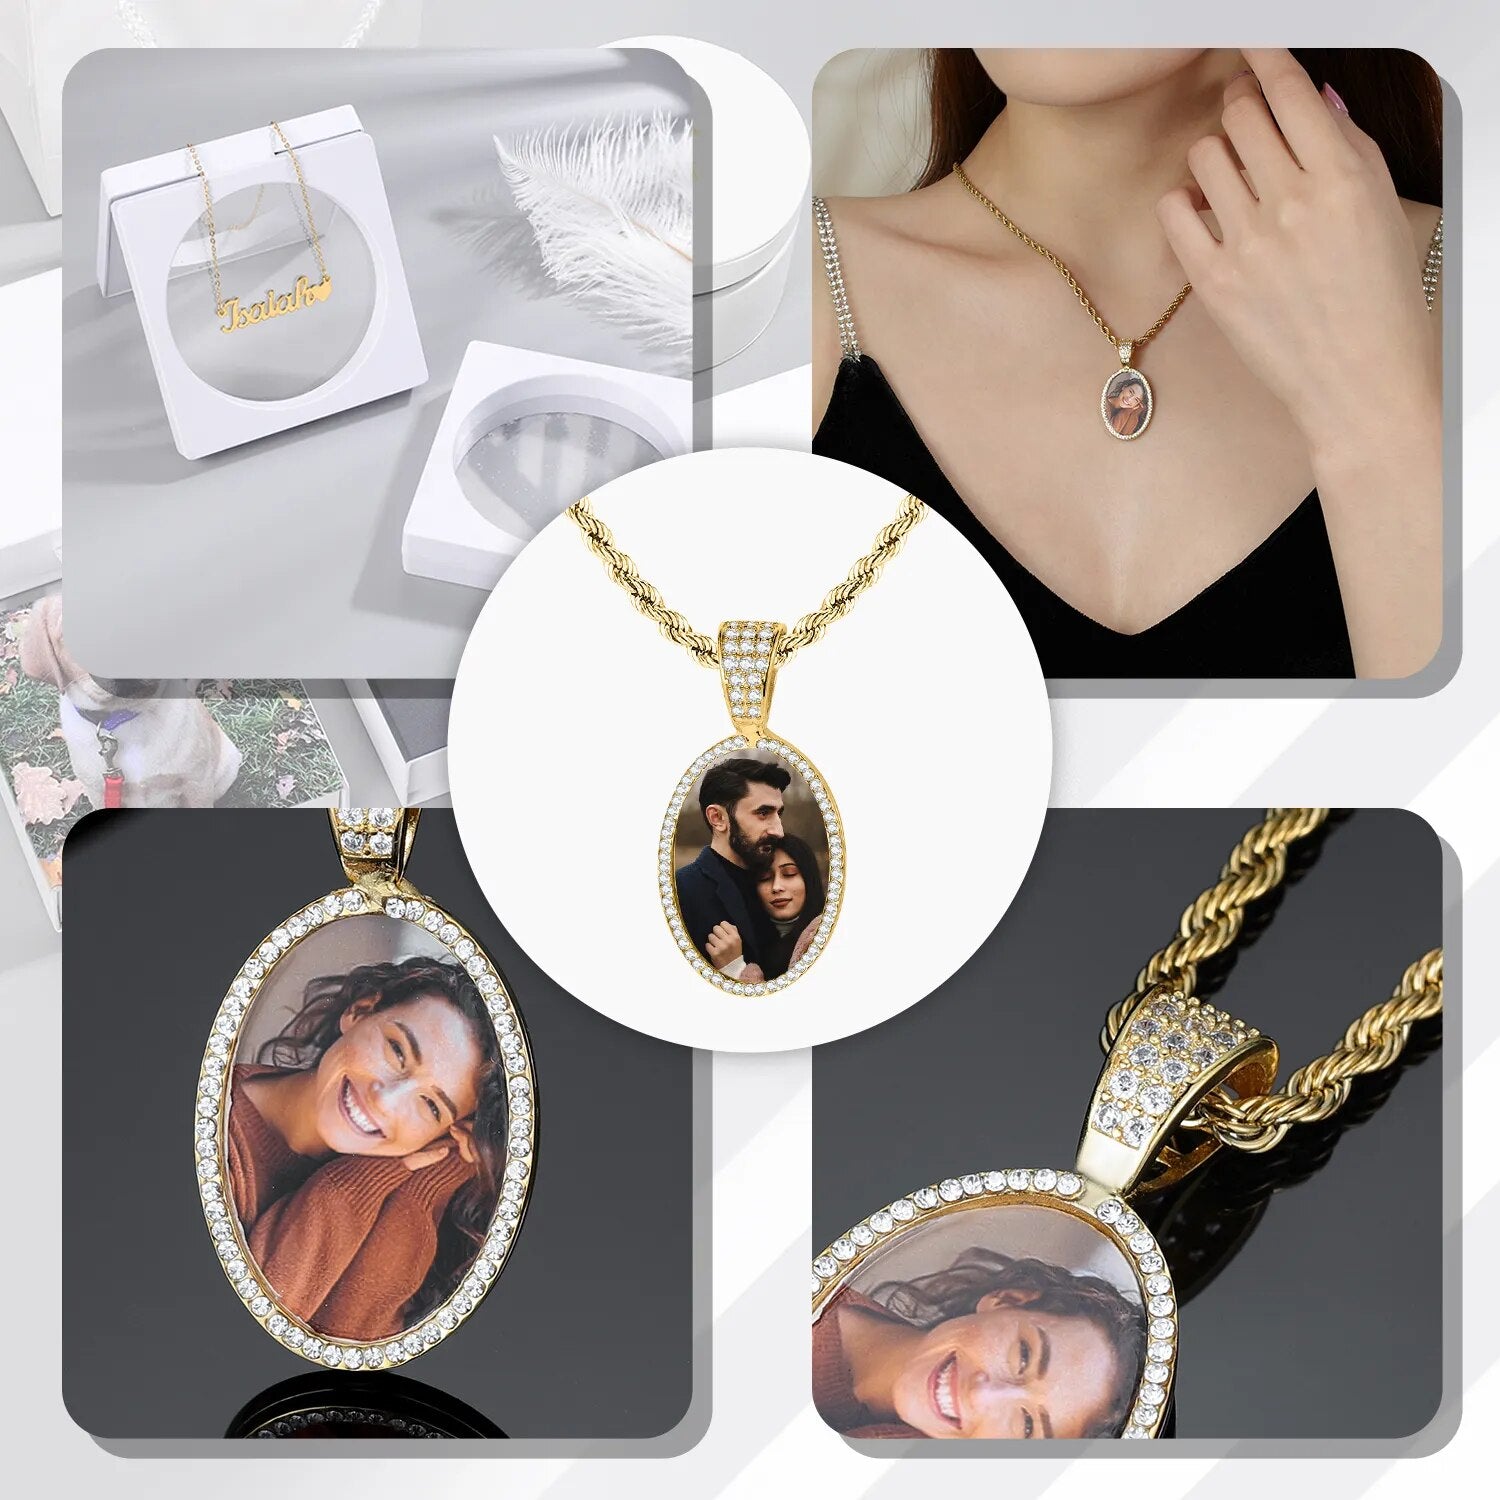 Personalized Photo Memory Picture Necklace